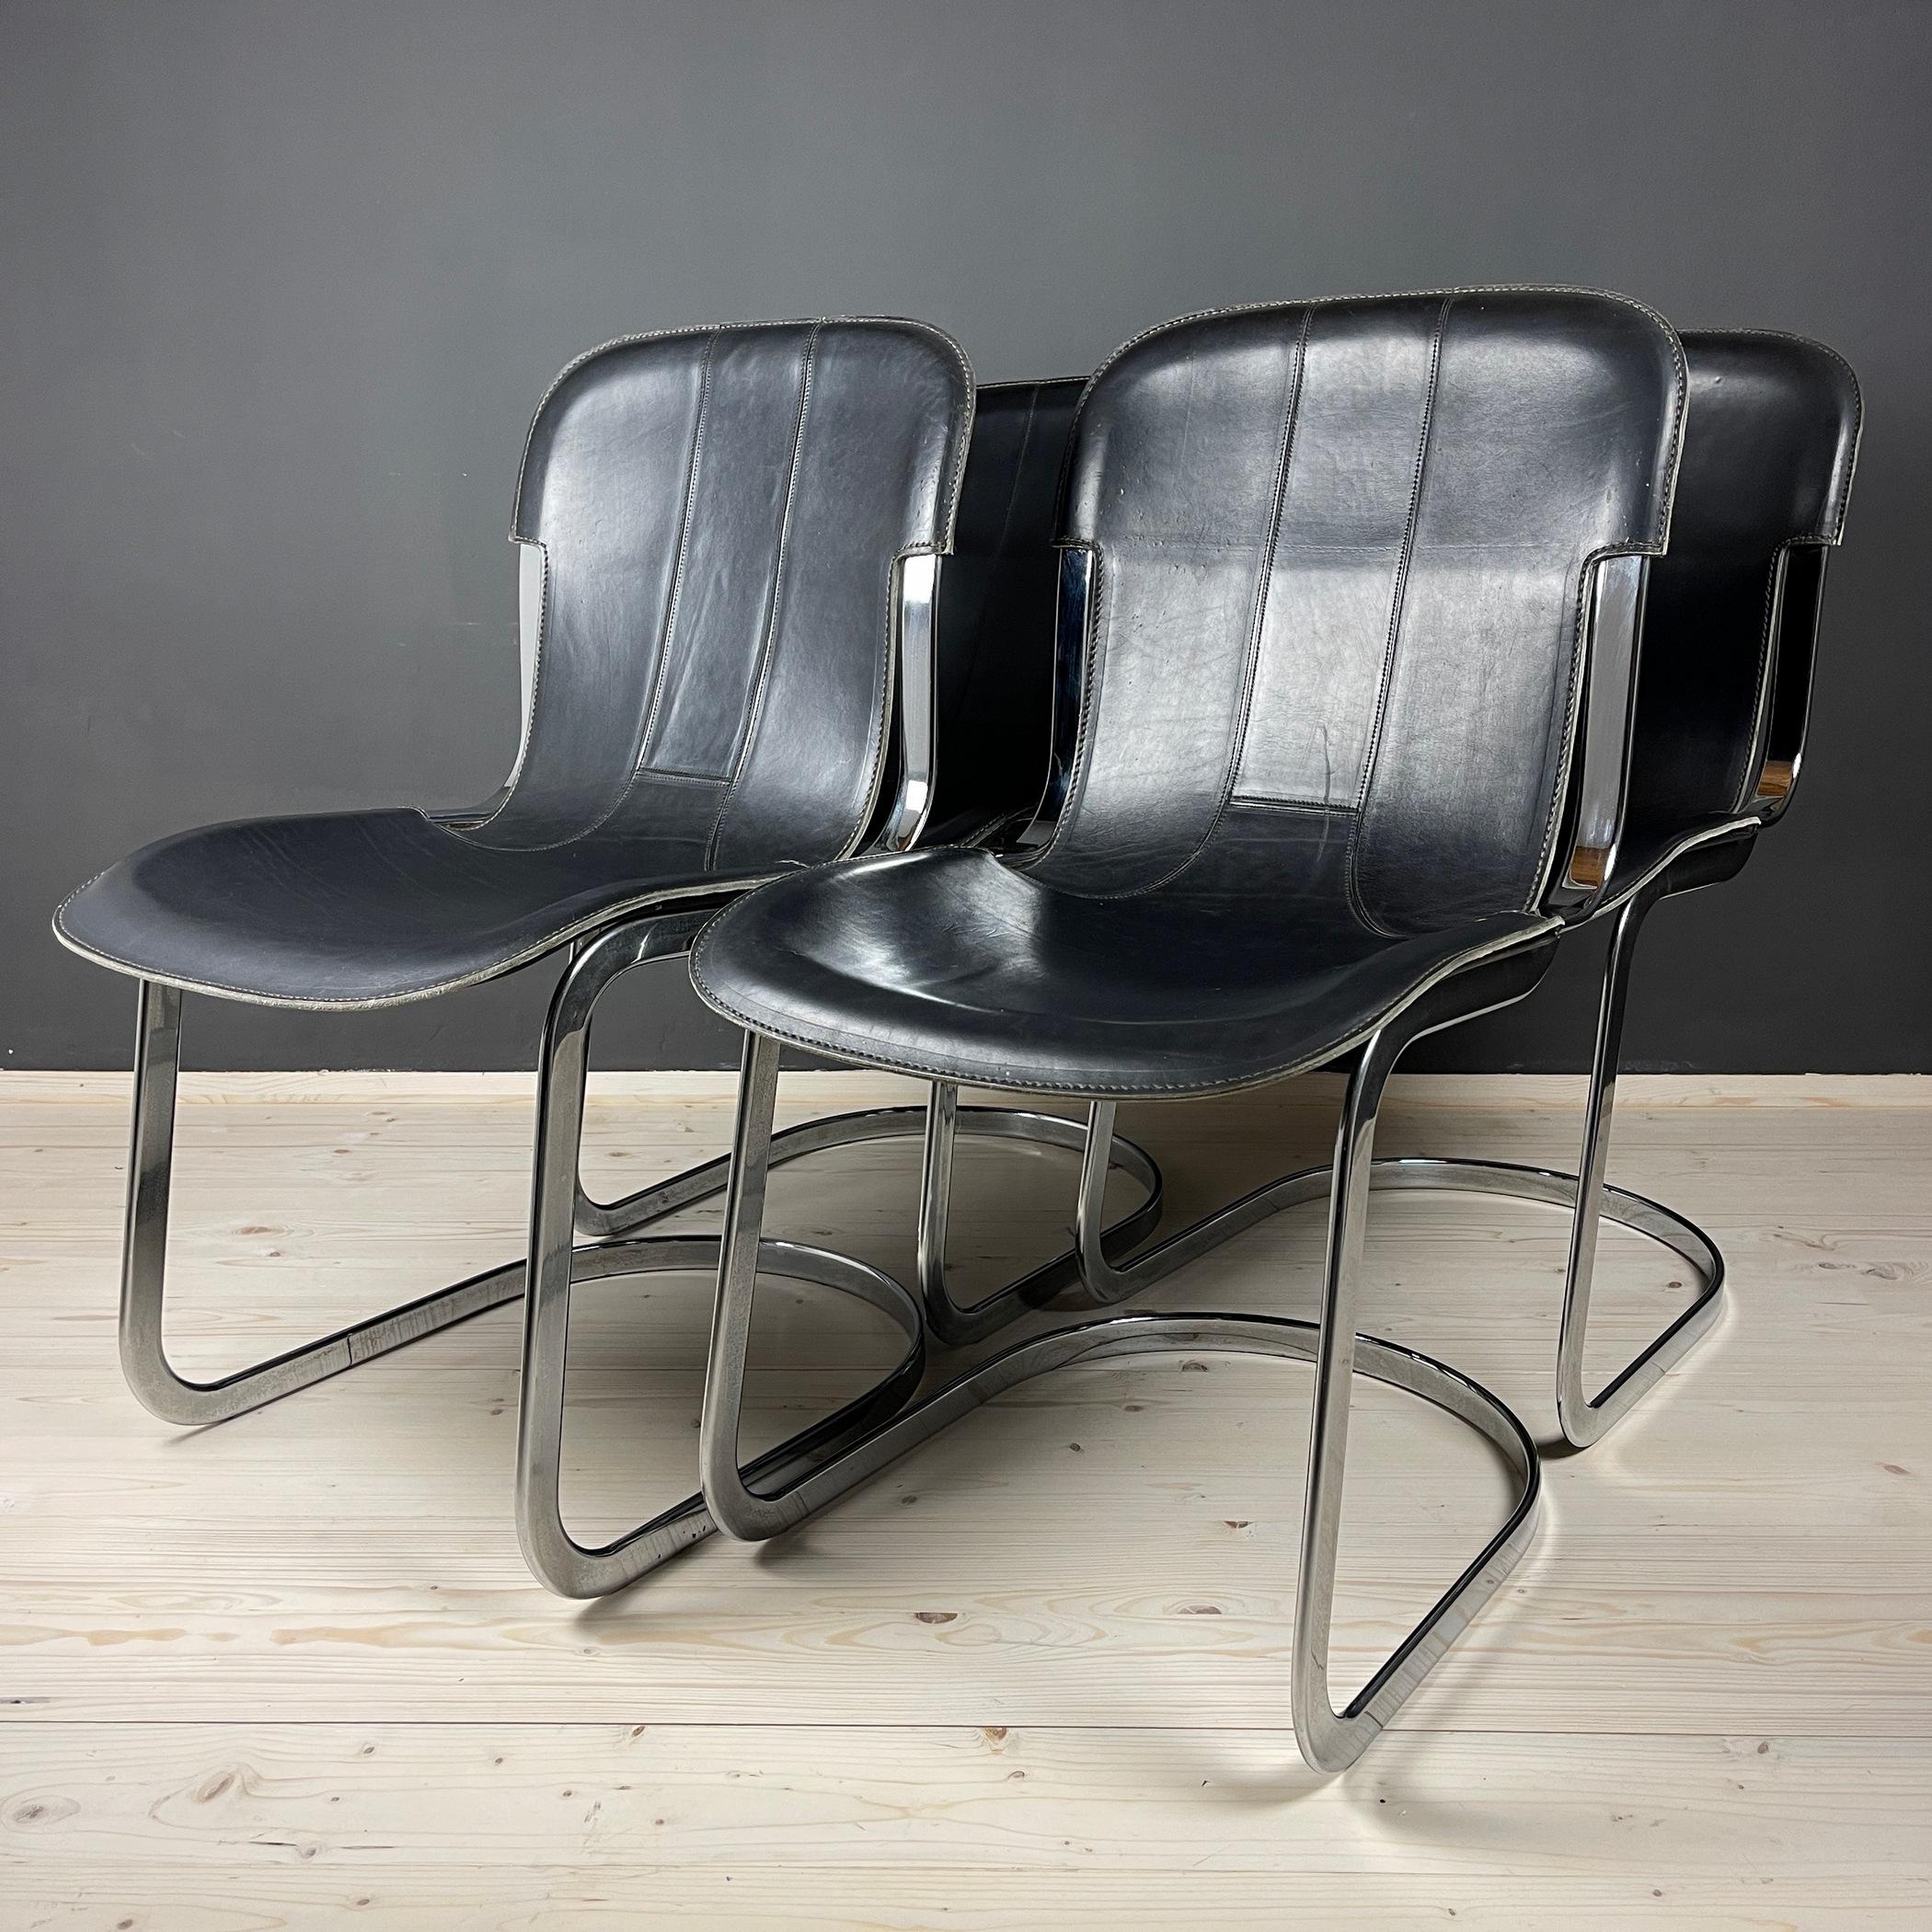 Set of 4 dining chairs Model C2 by Willy Rizzo For Cidue was made in Italy in the 1970s. An ingenious photographer turned furniture designer because, according to him, 